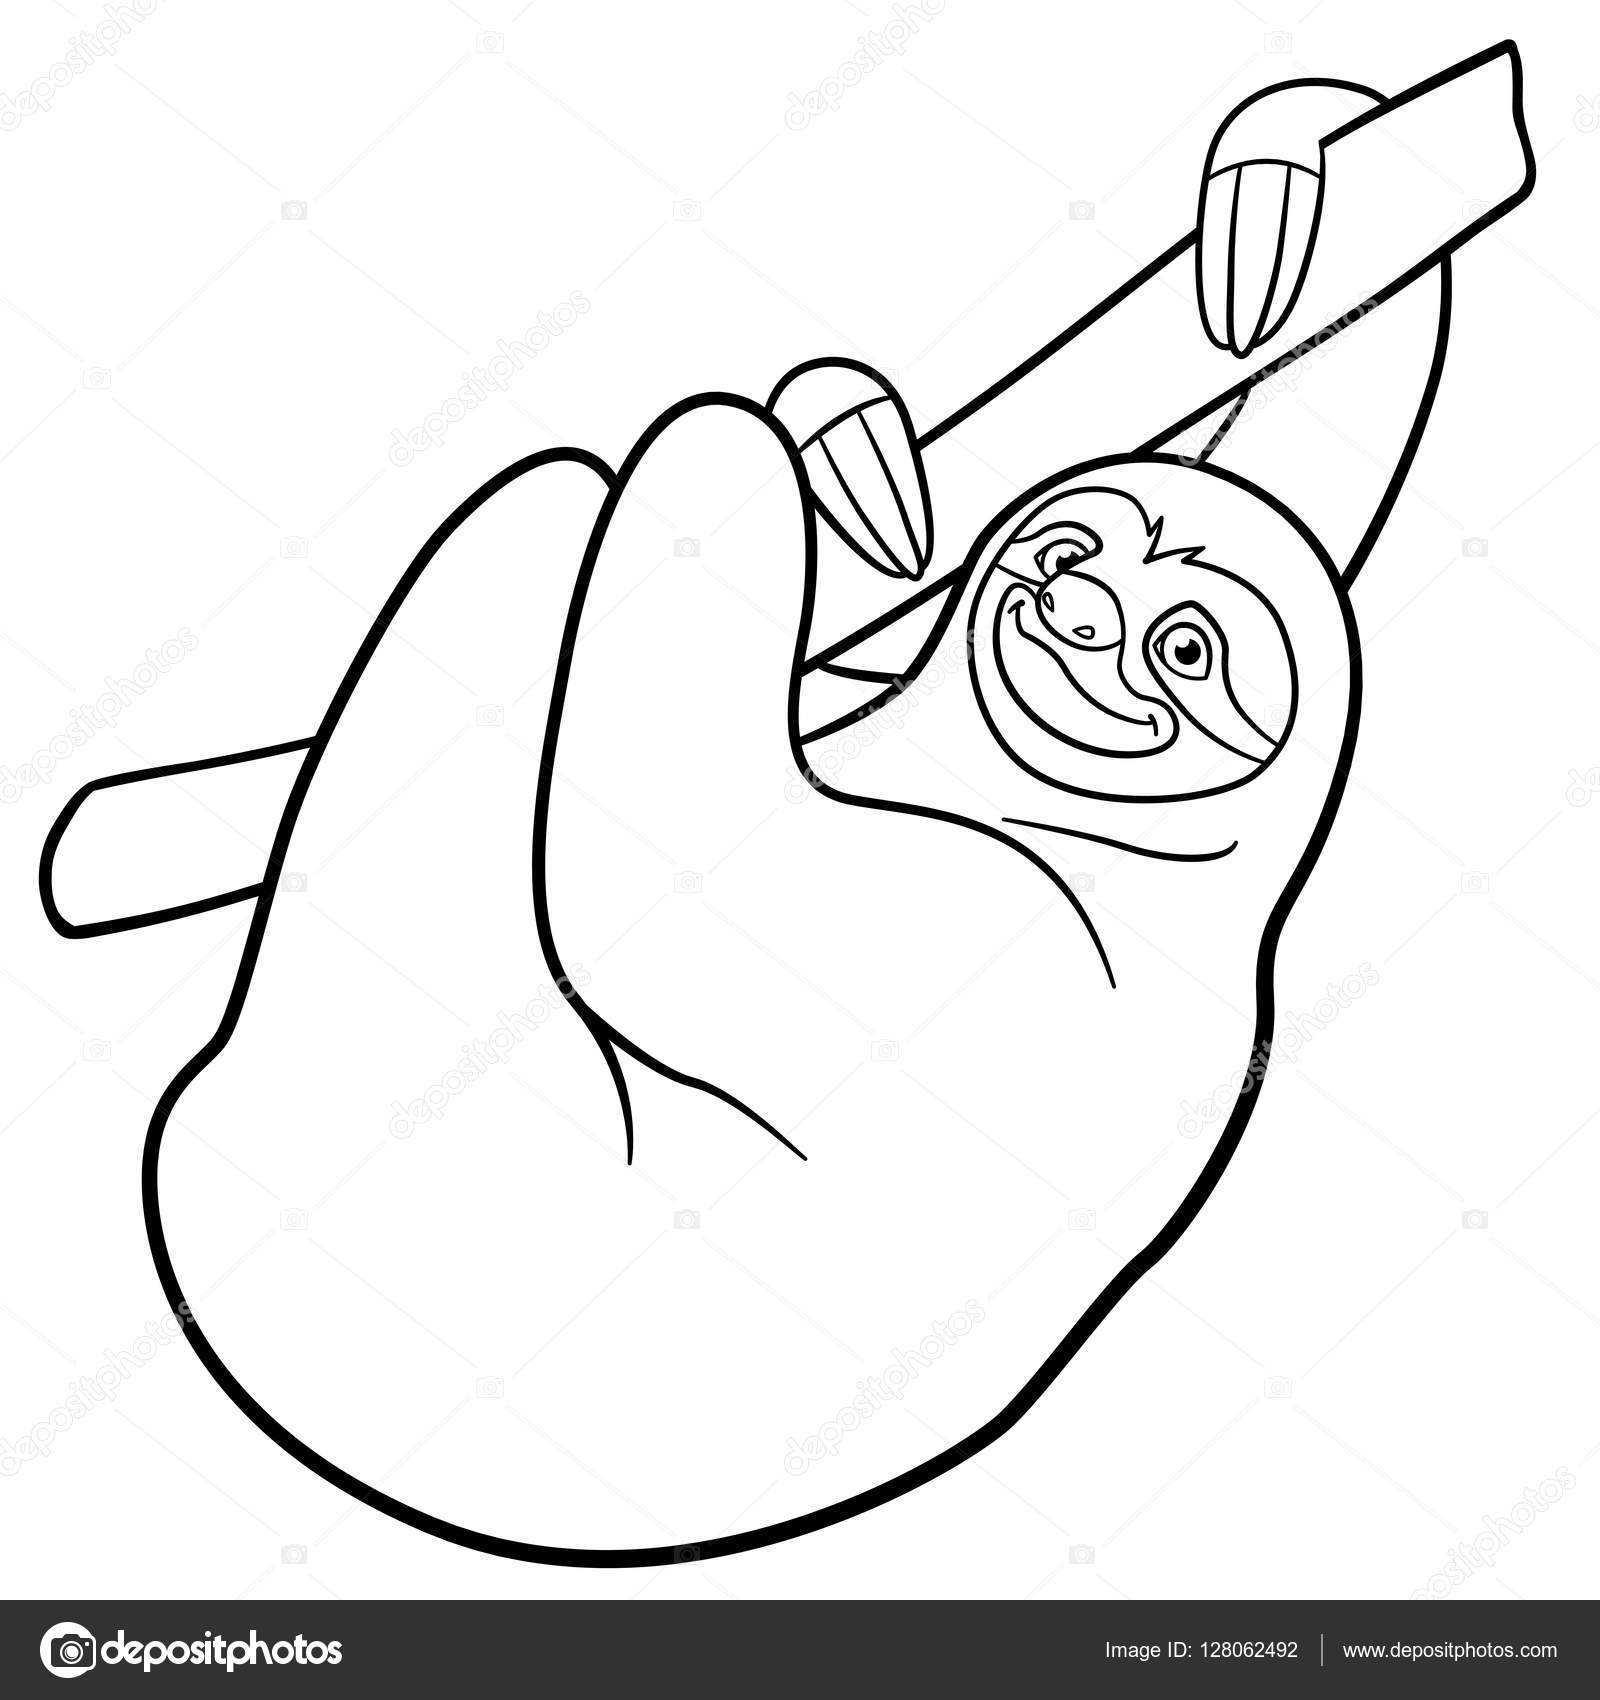 Coloring pages. Cute lazy sloth hangs on the tree. Stock Vector ...